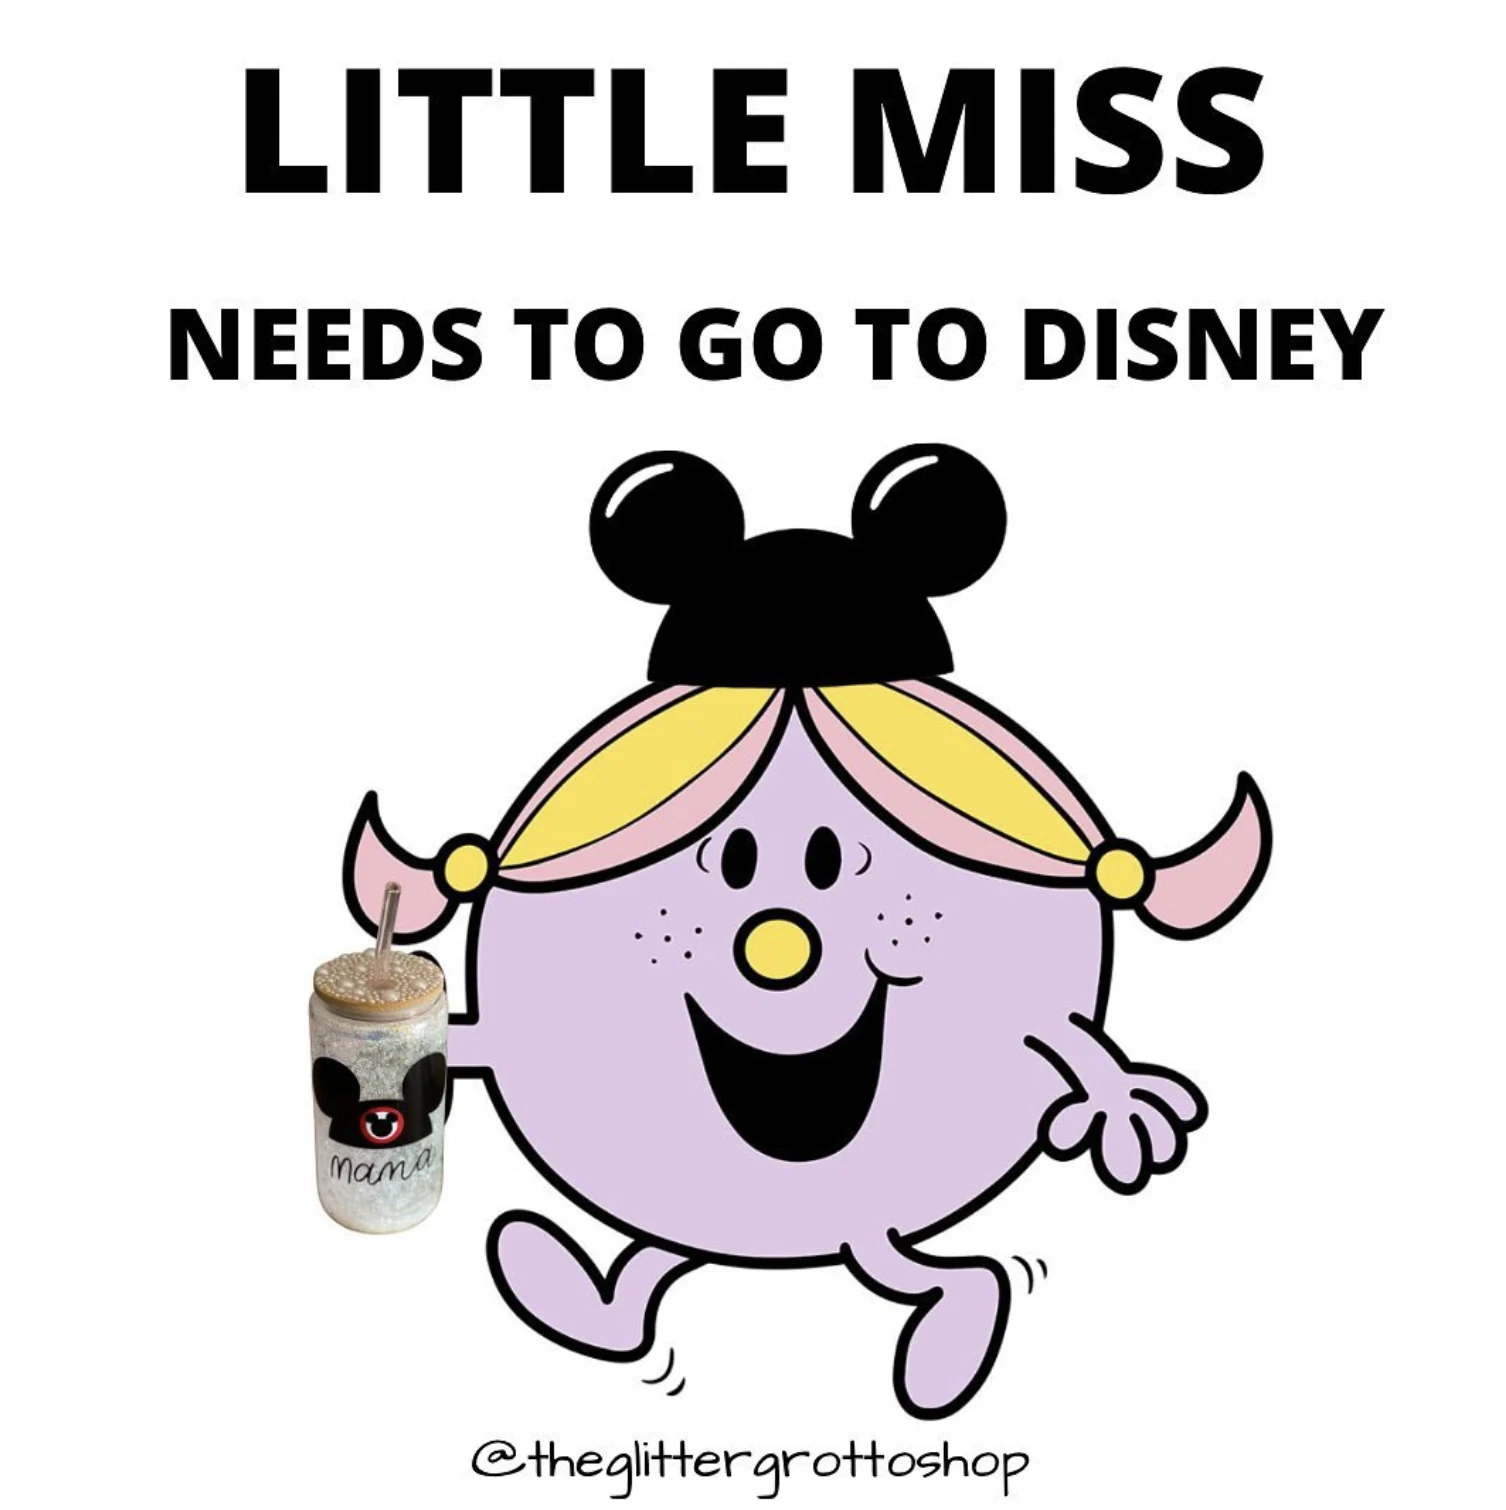 How to make your own own little miss memes?